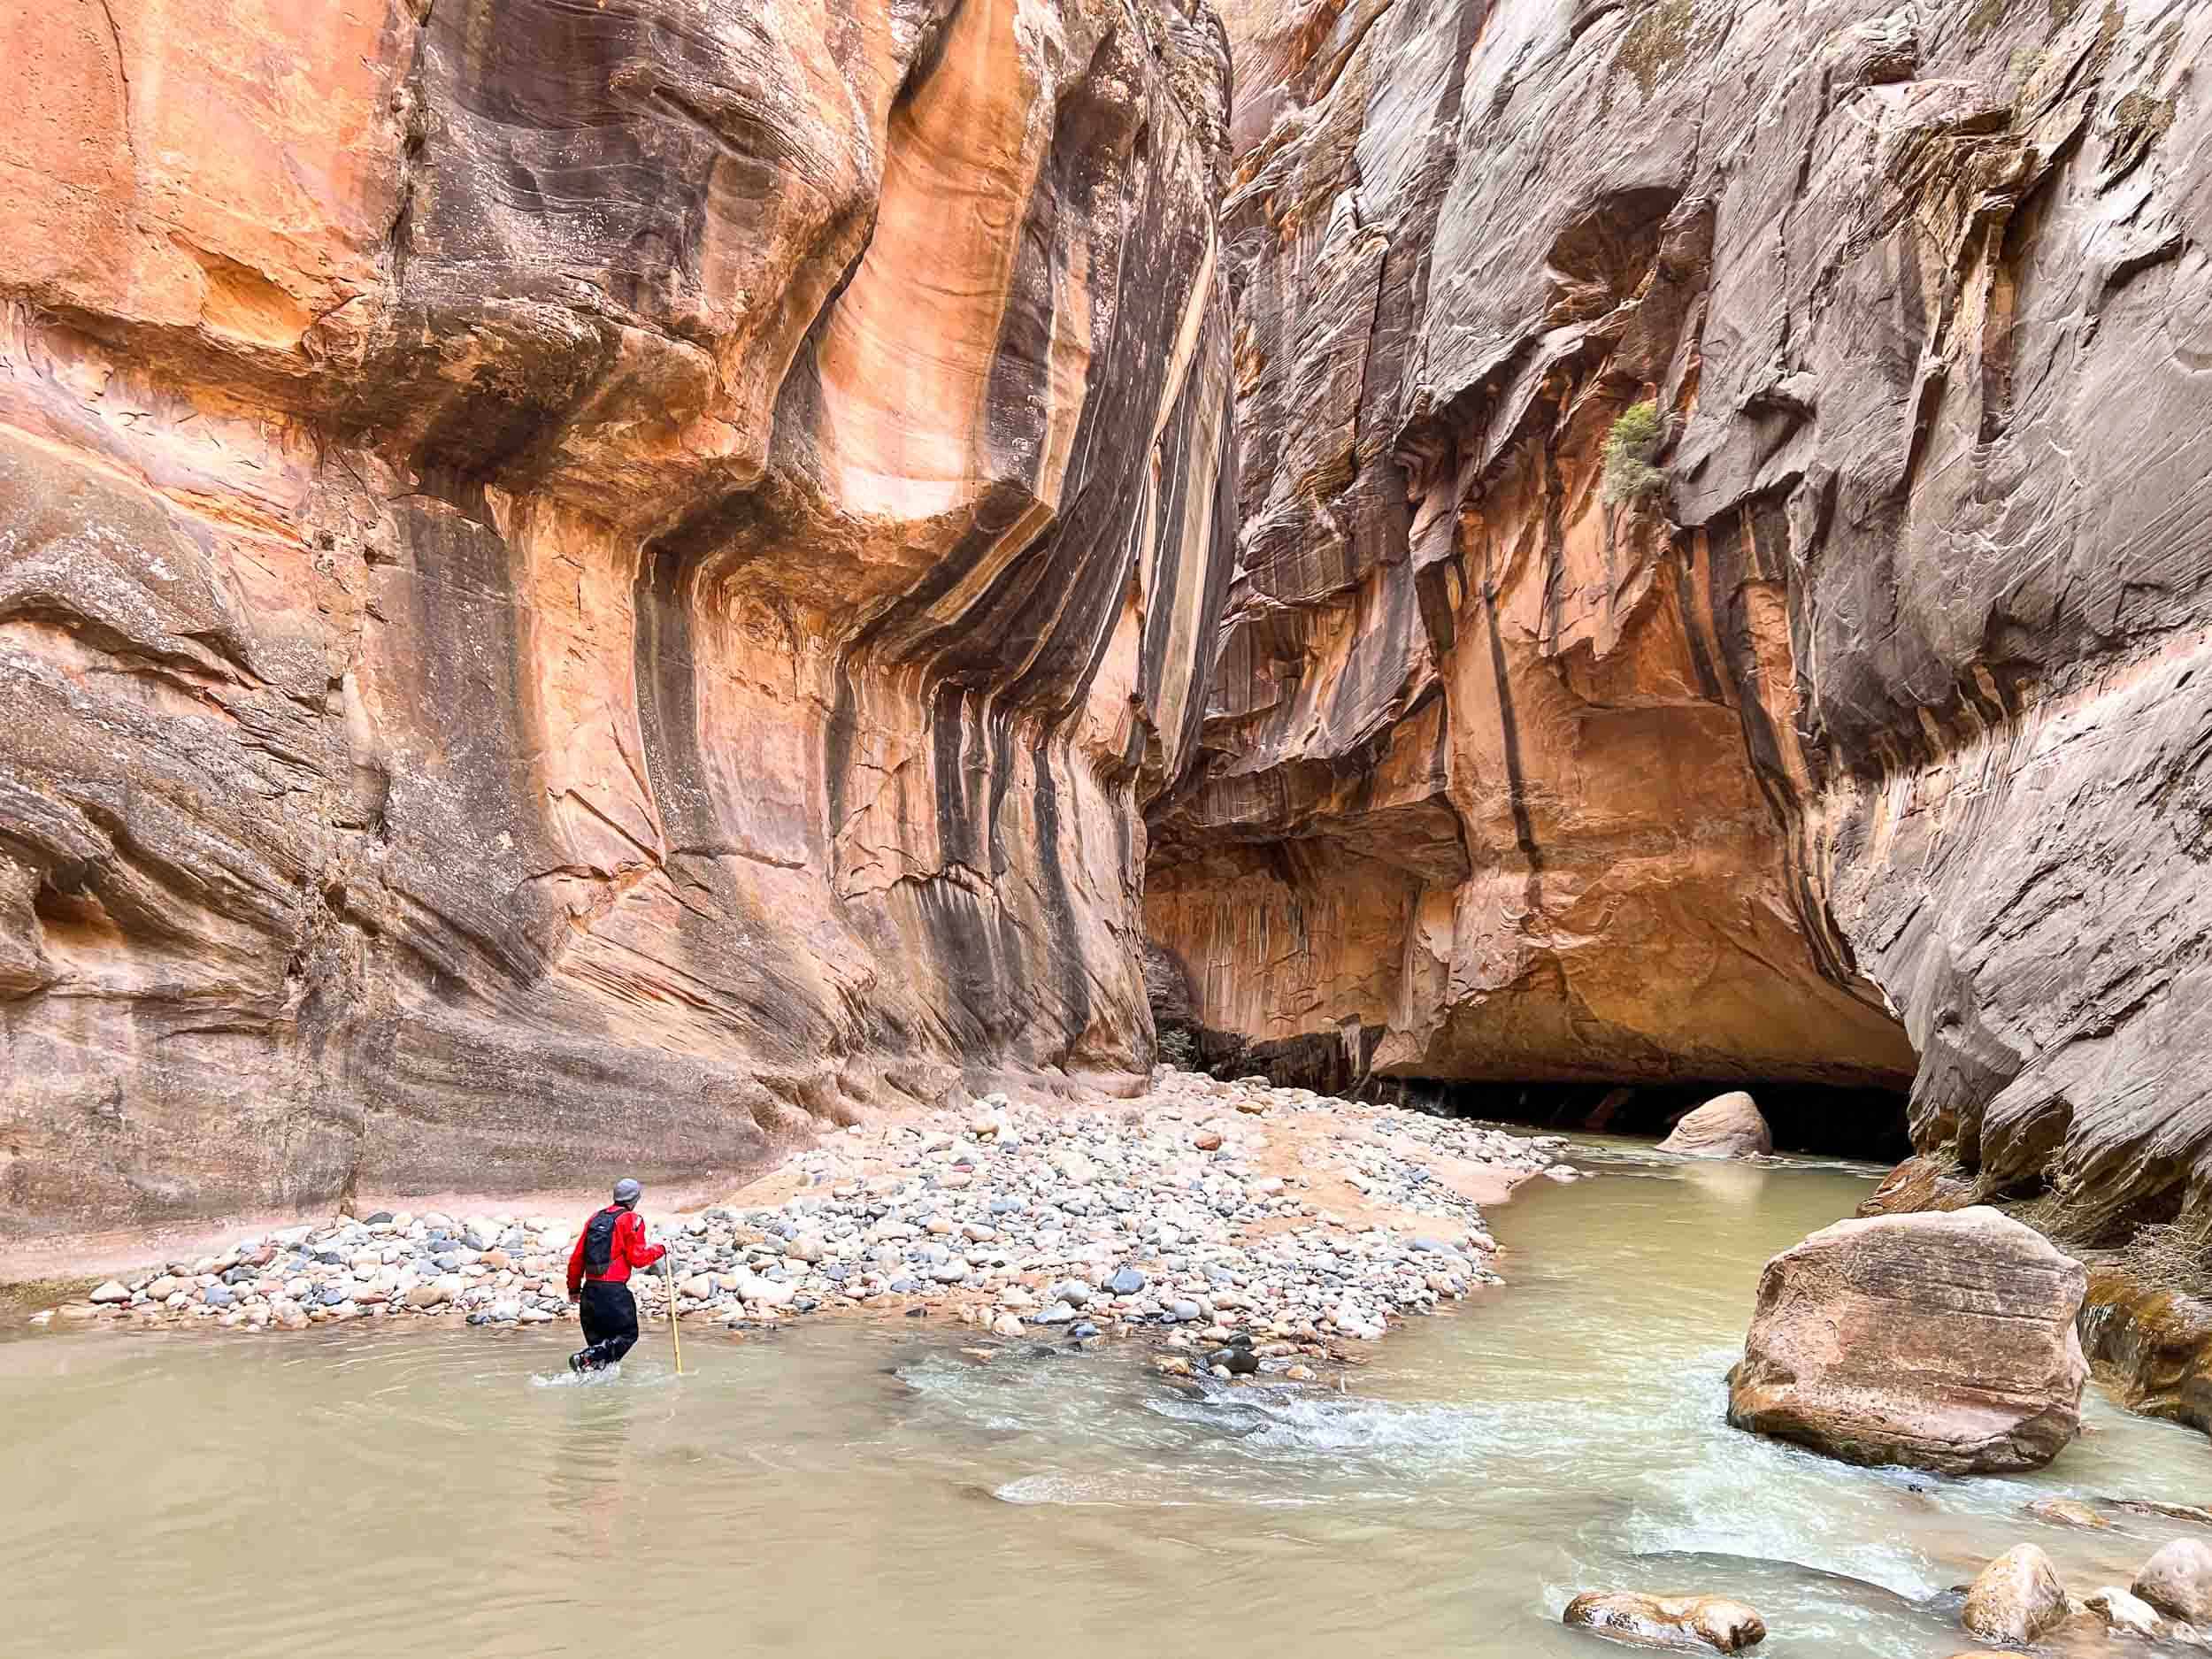 Hiking the Narrows in winter in Zion National Park wearing a dry suit